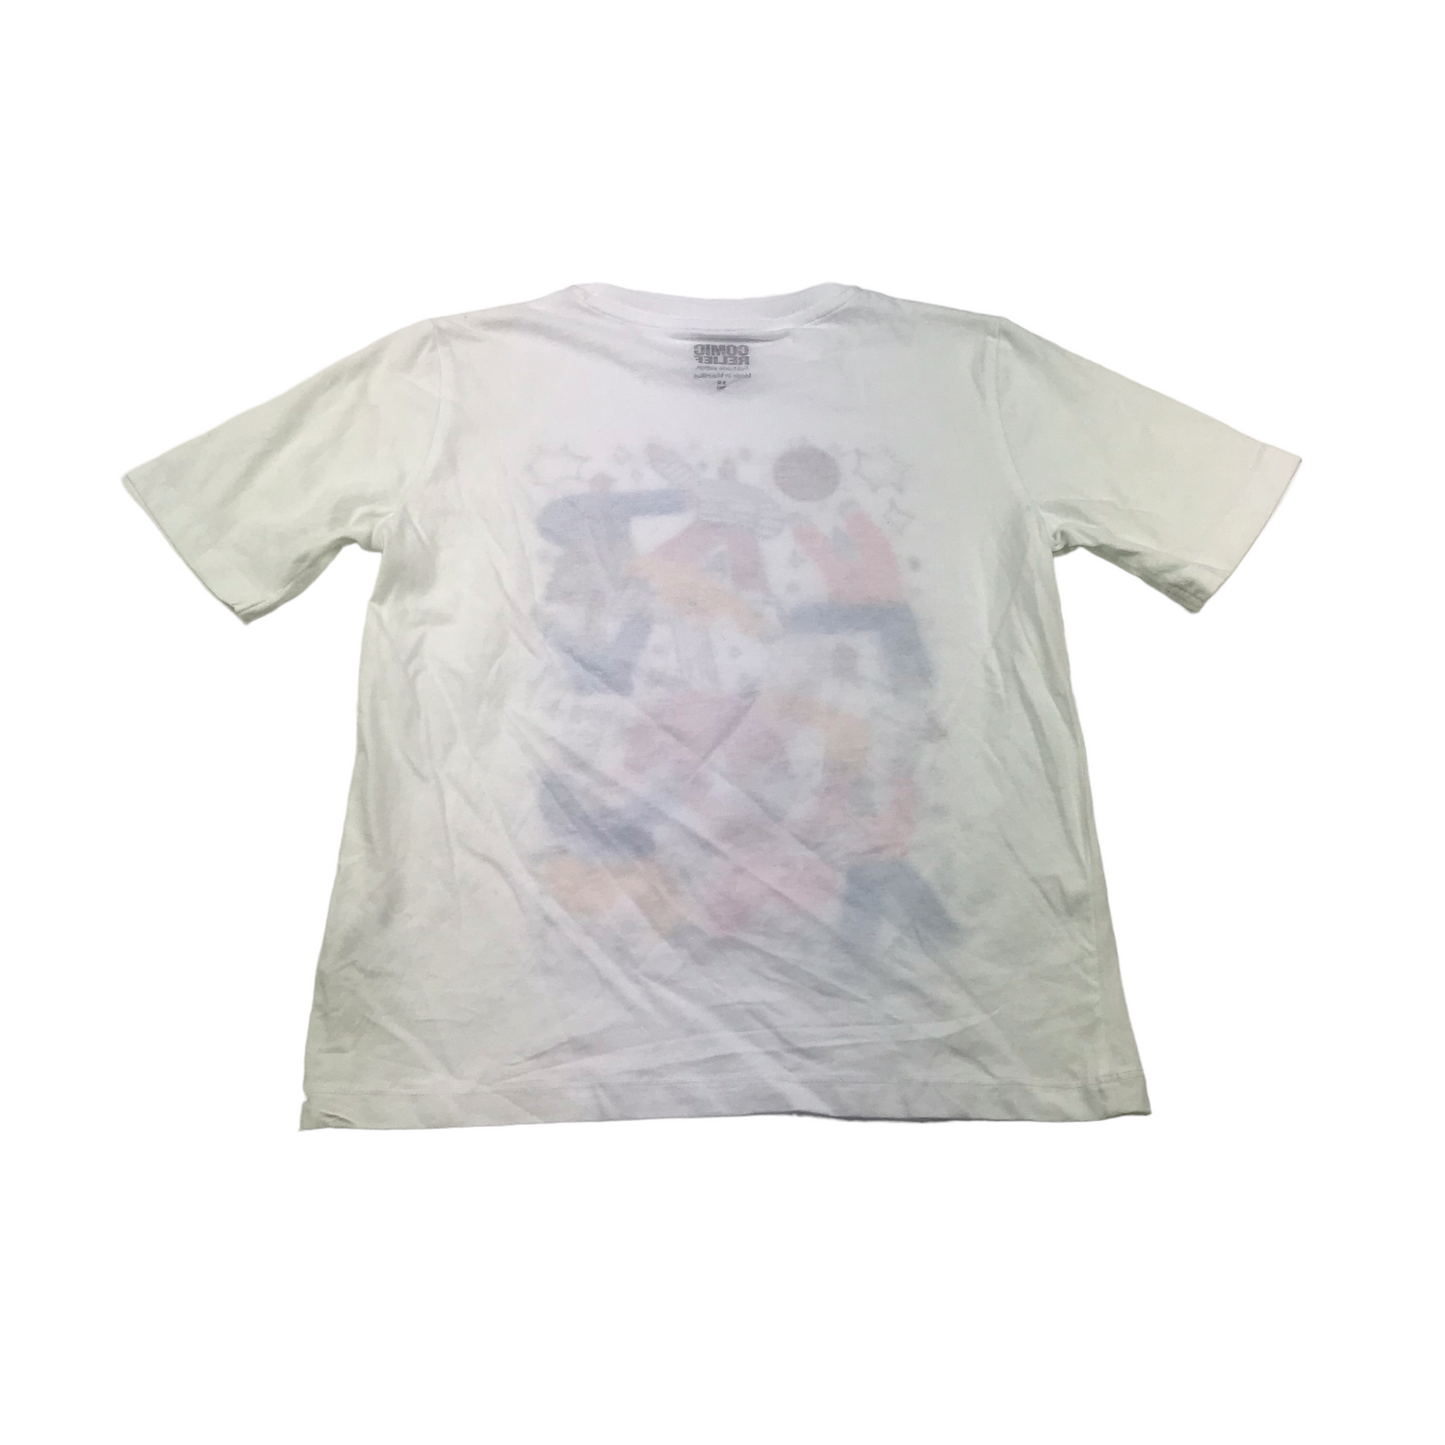 Comic Relief White Print T-shirt Age 9